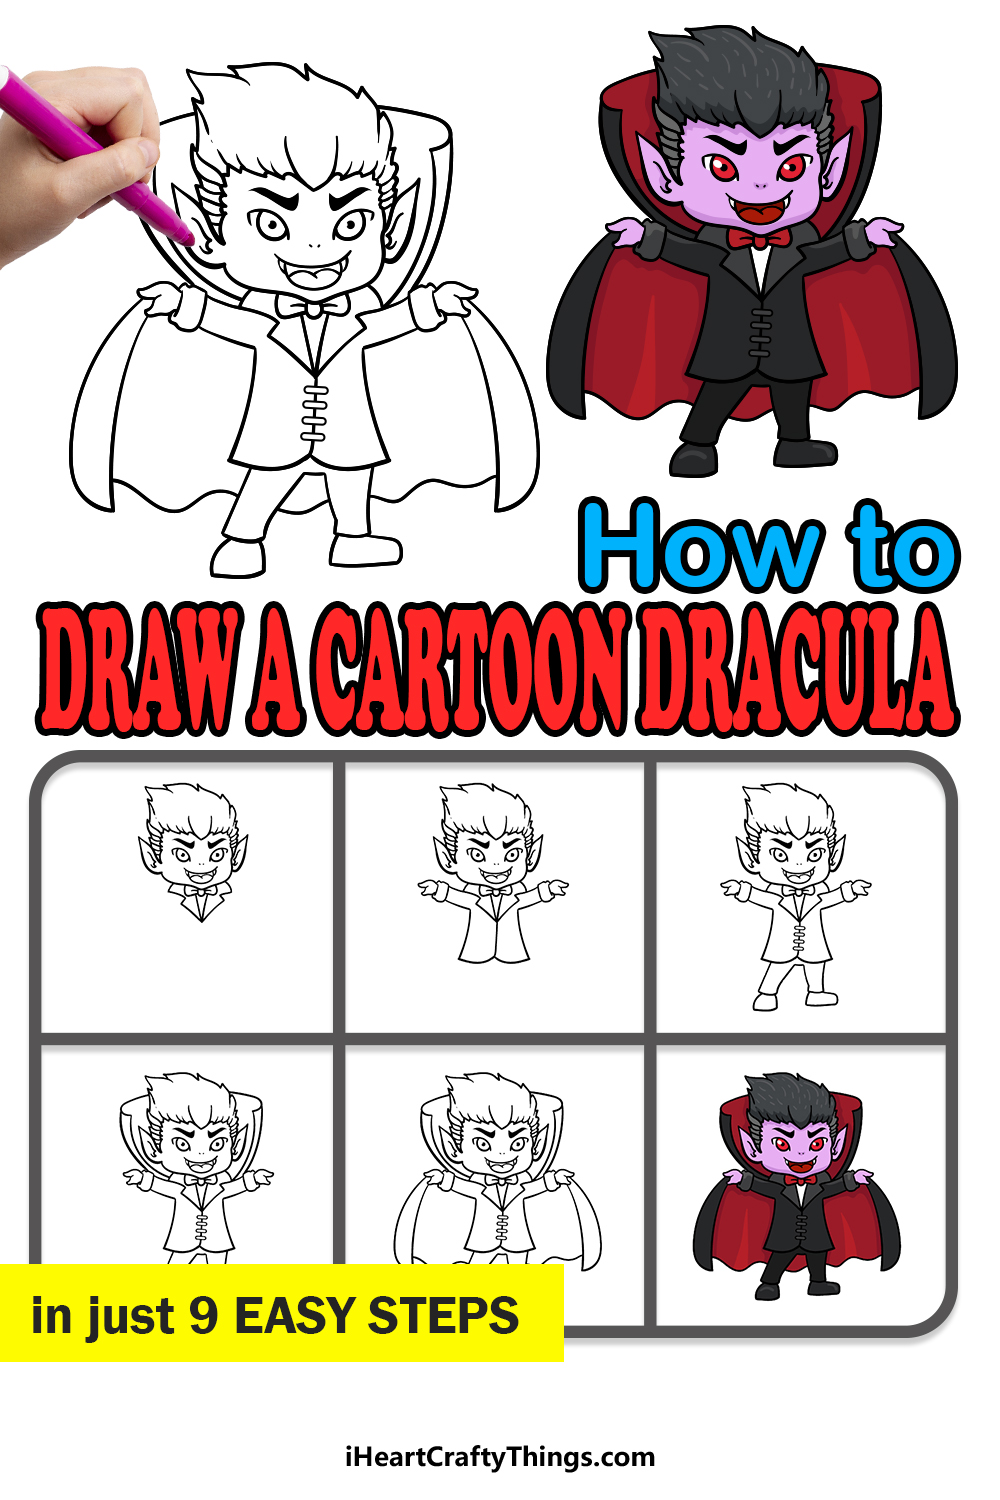 how to draw a cartoon Dracula in 9 easy steps